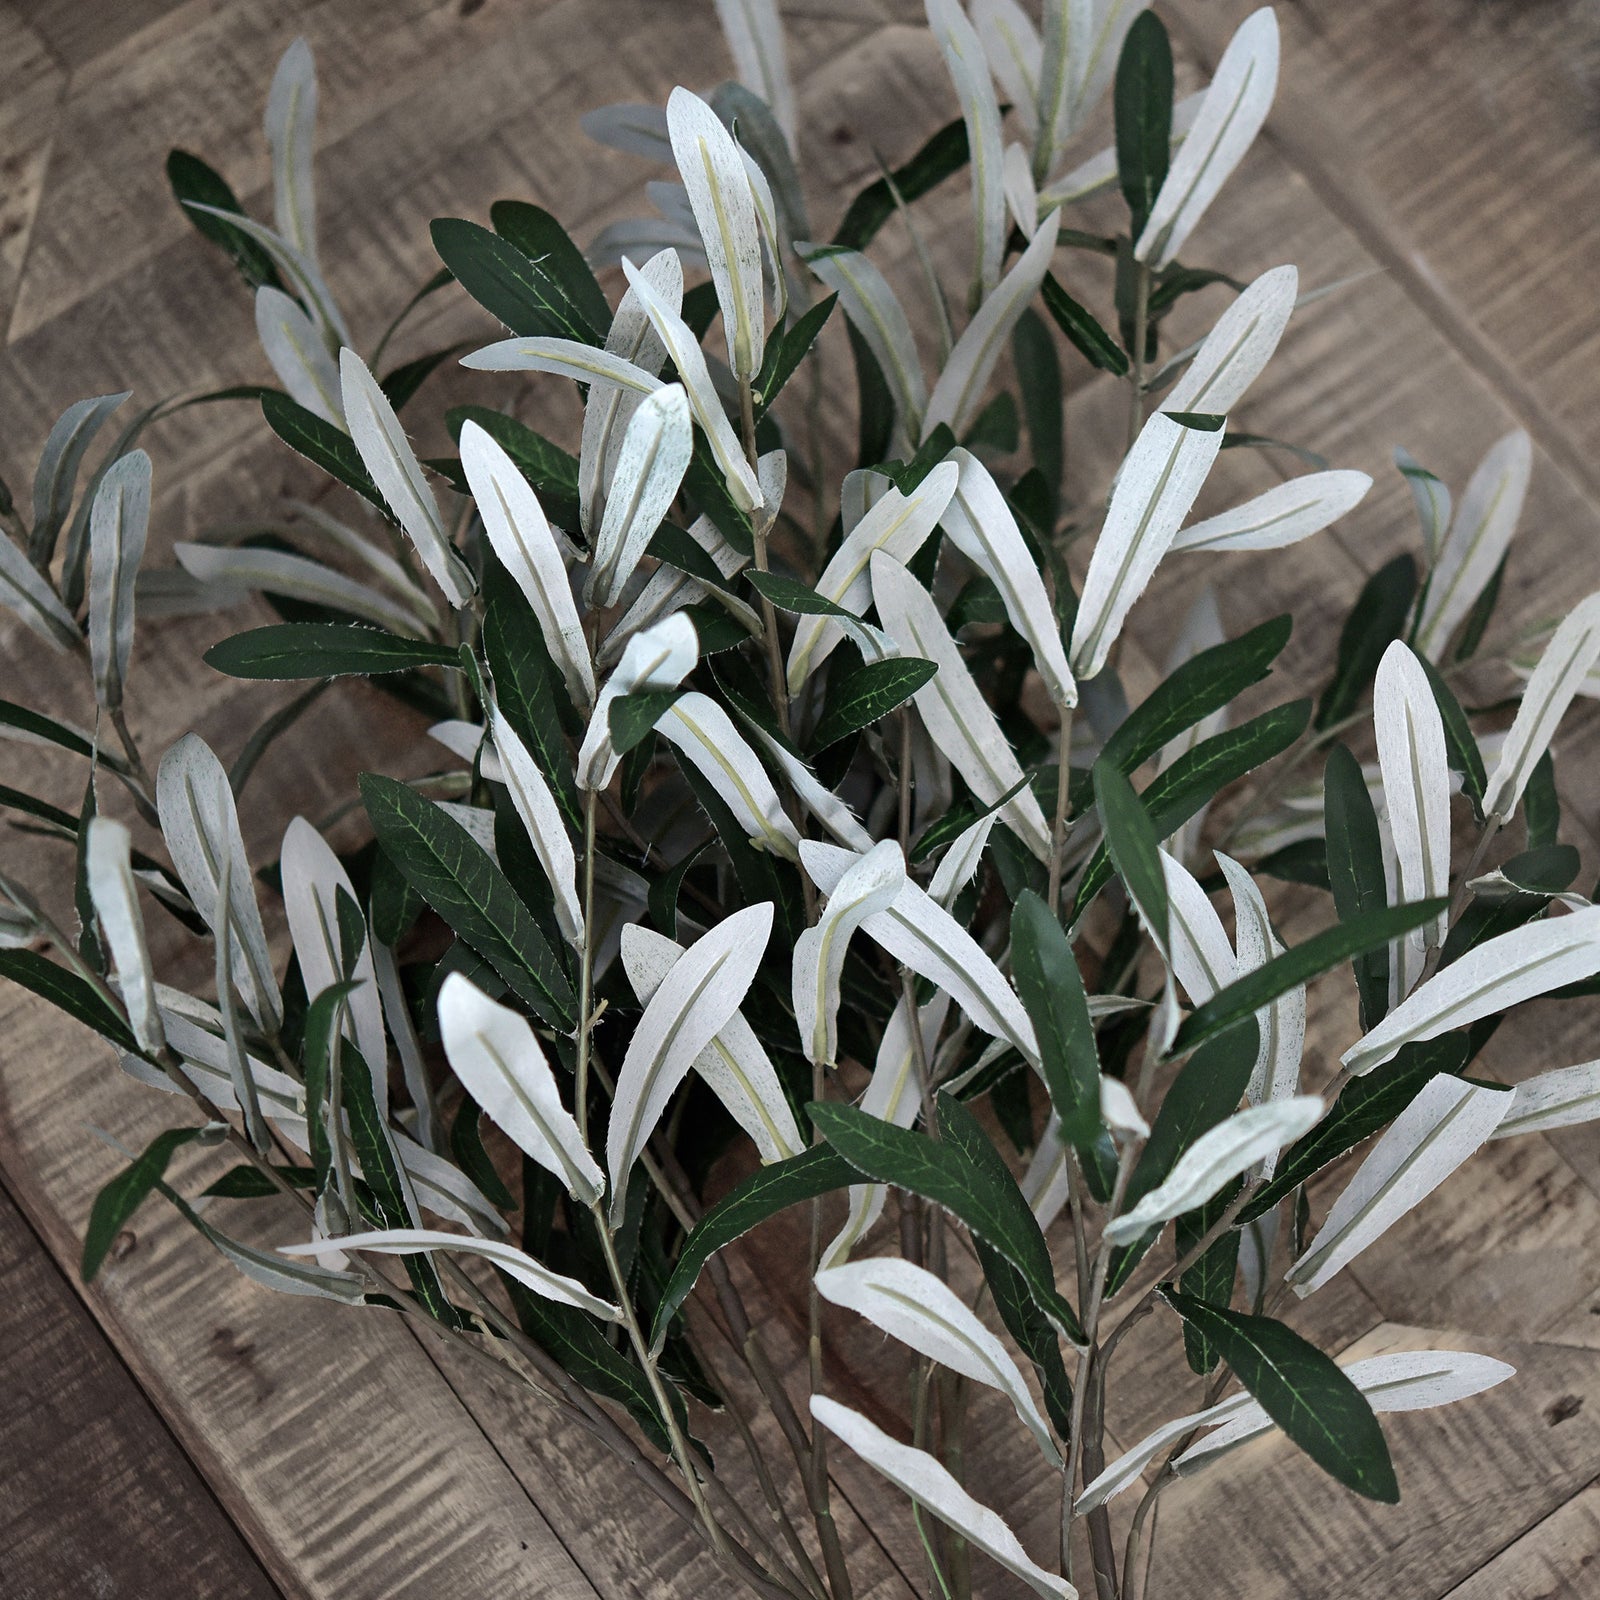 Lifelike Premium Olive Stems: Quality 30-inch Artificial Greenery for Floral Arrangements and Stylish Decor (6 Stems)